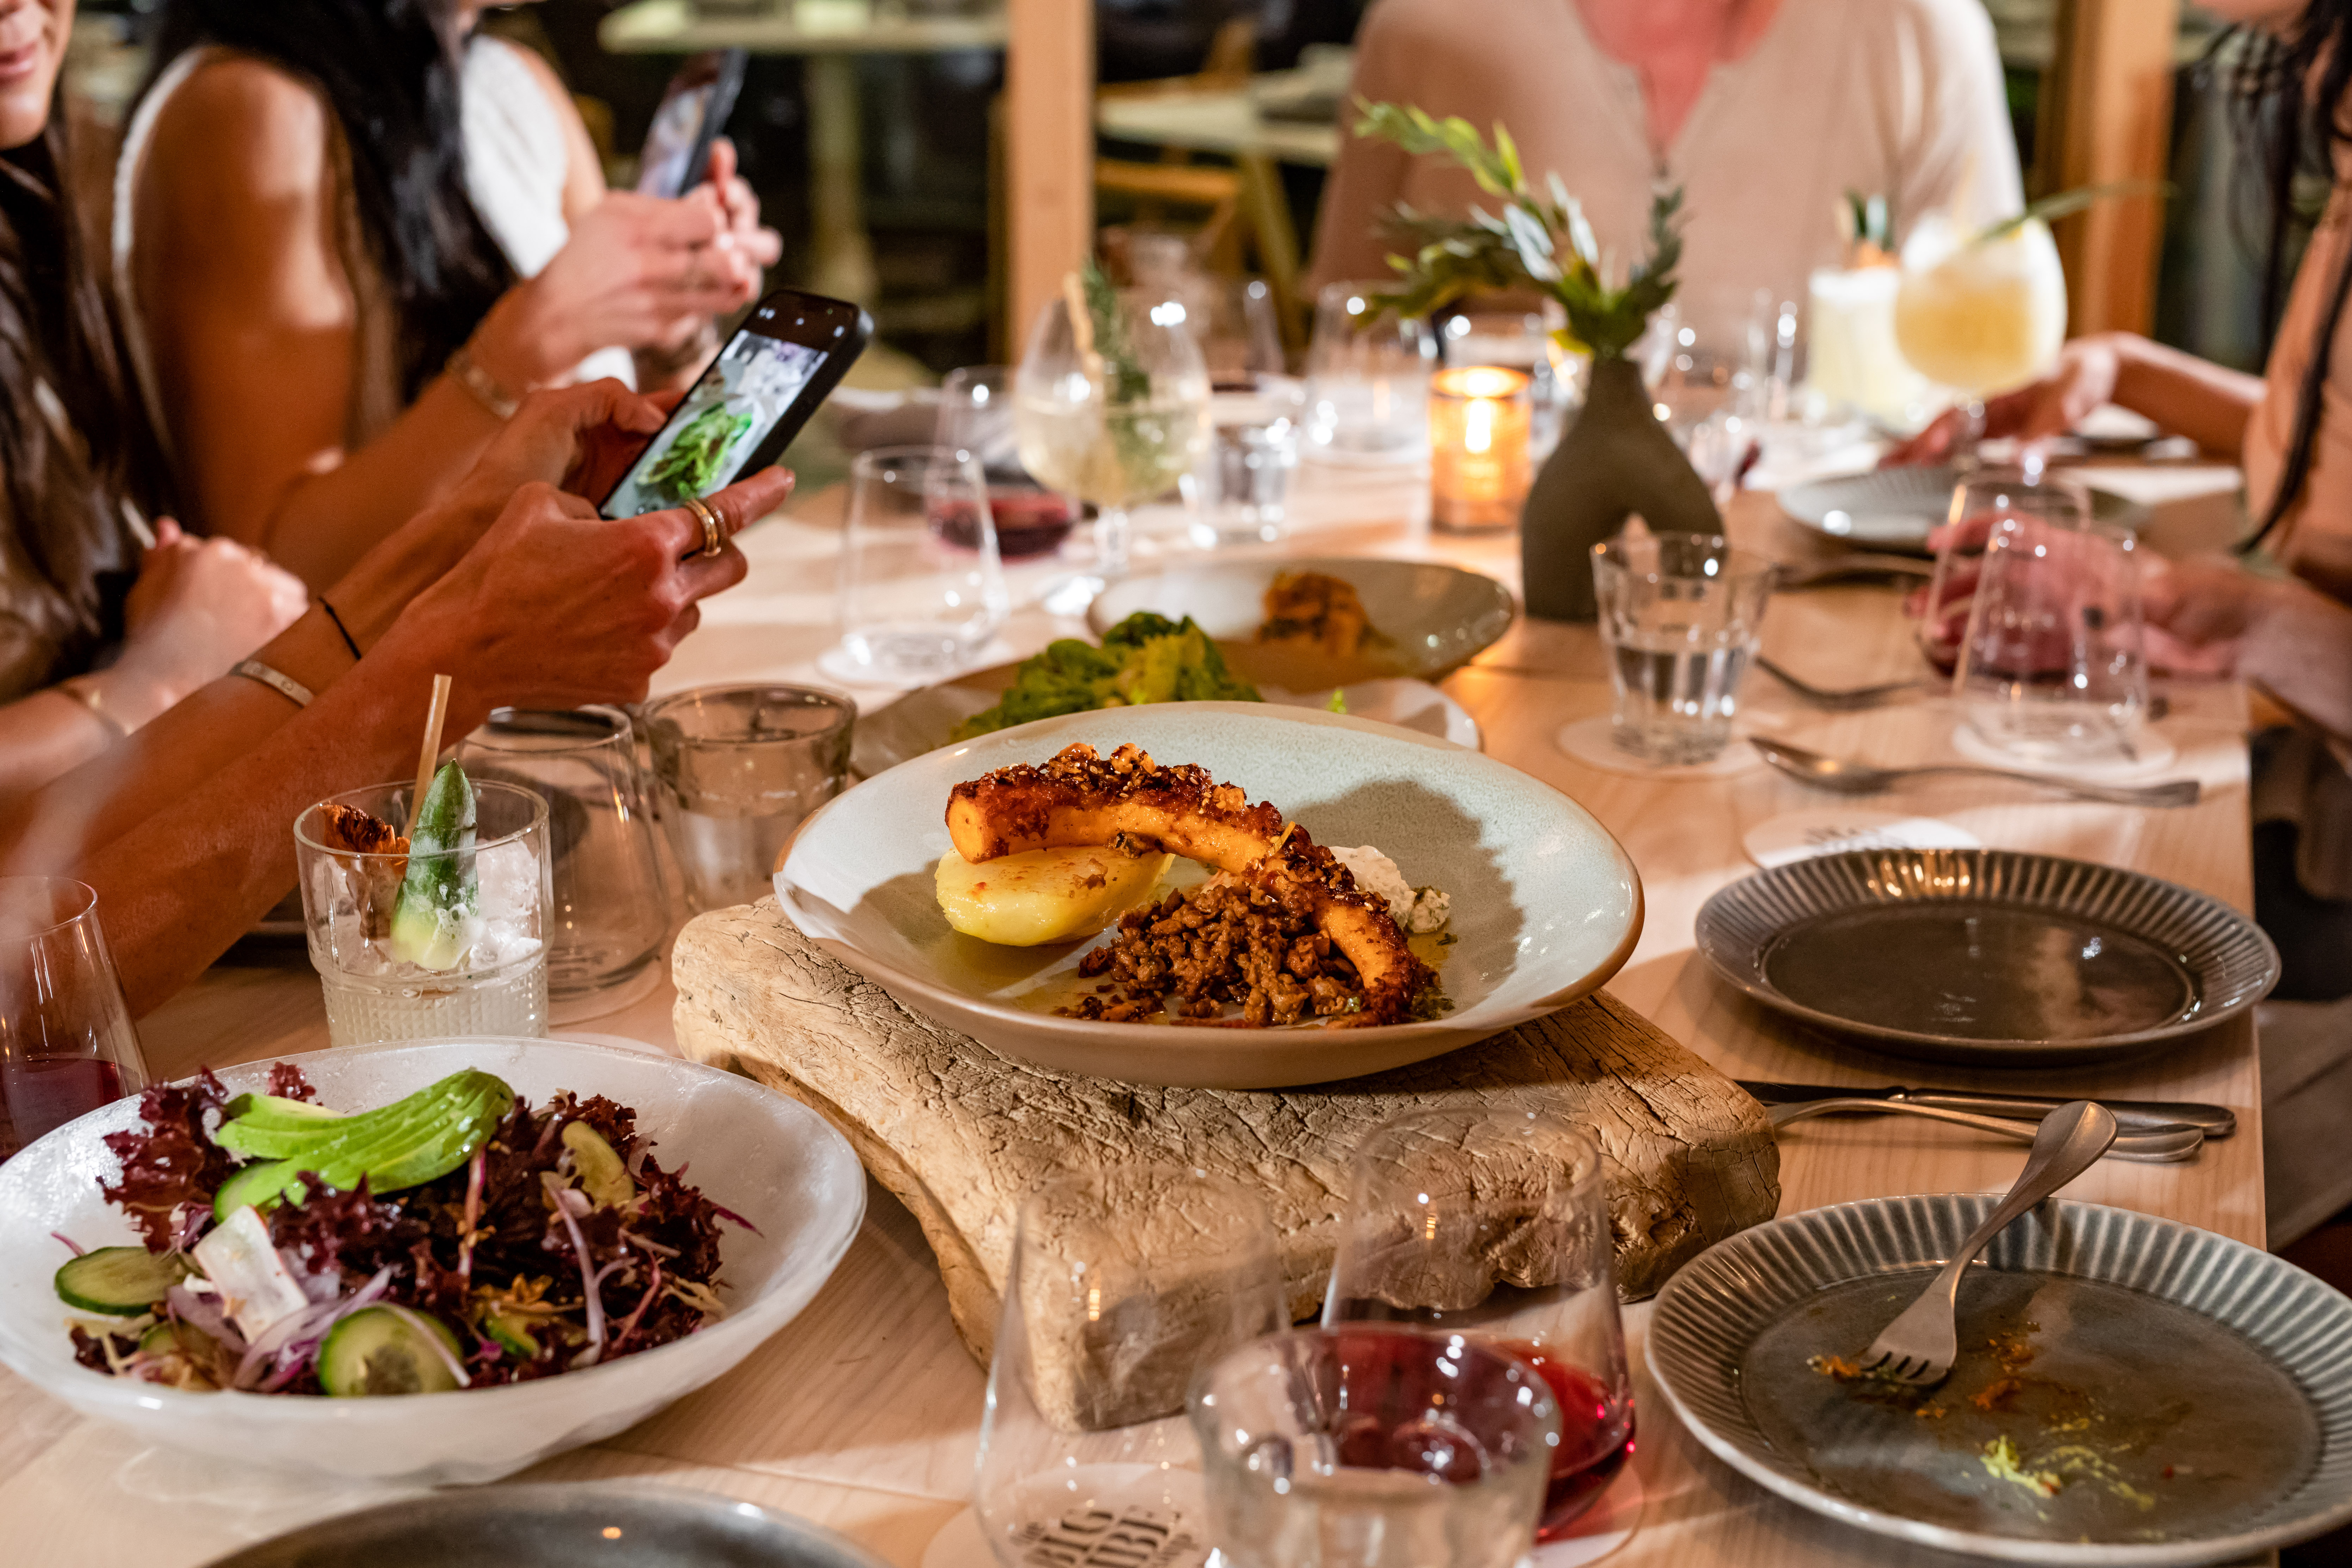 A festive table scape with a plate of octopus in the center, and guests holding their phones to snap a photo.